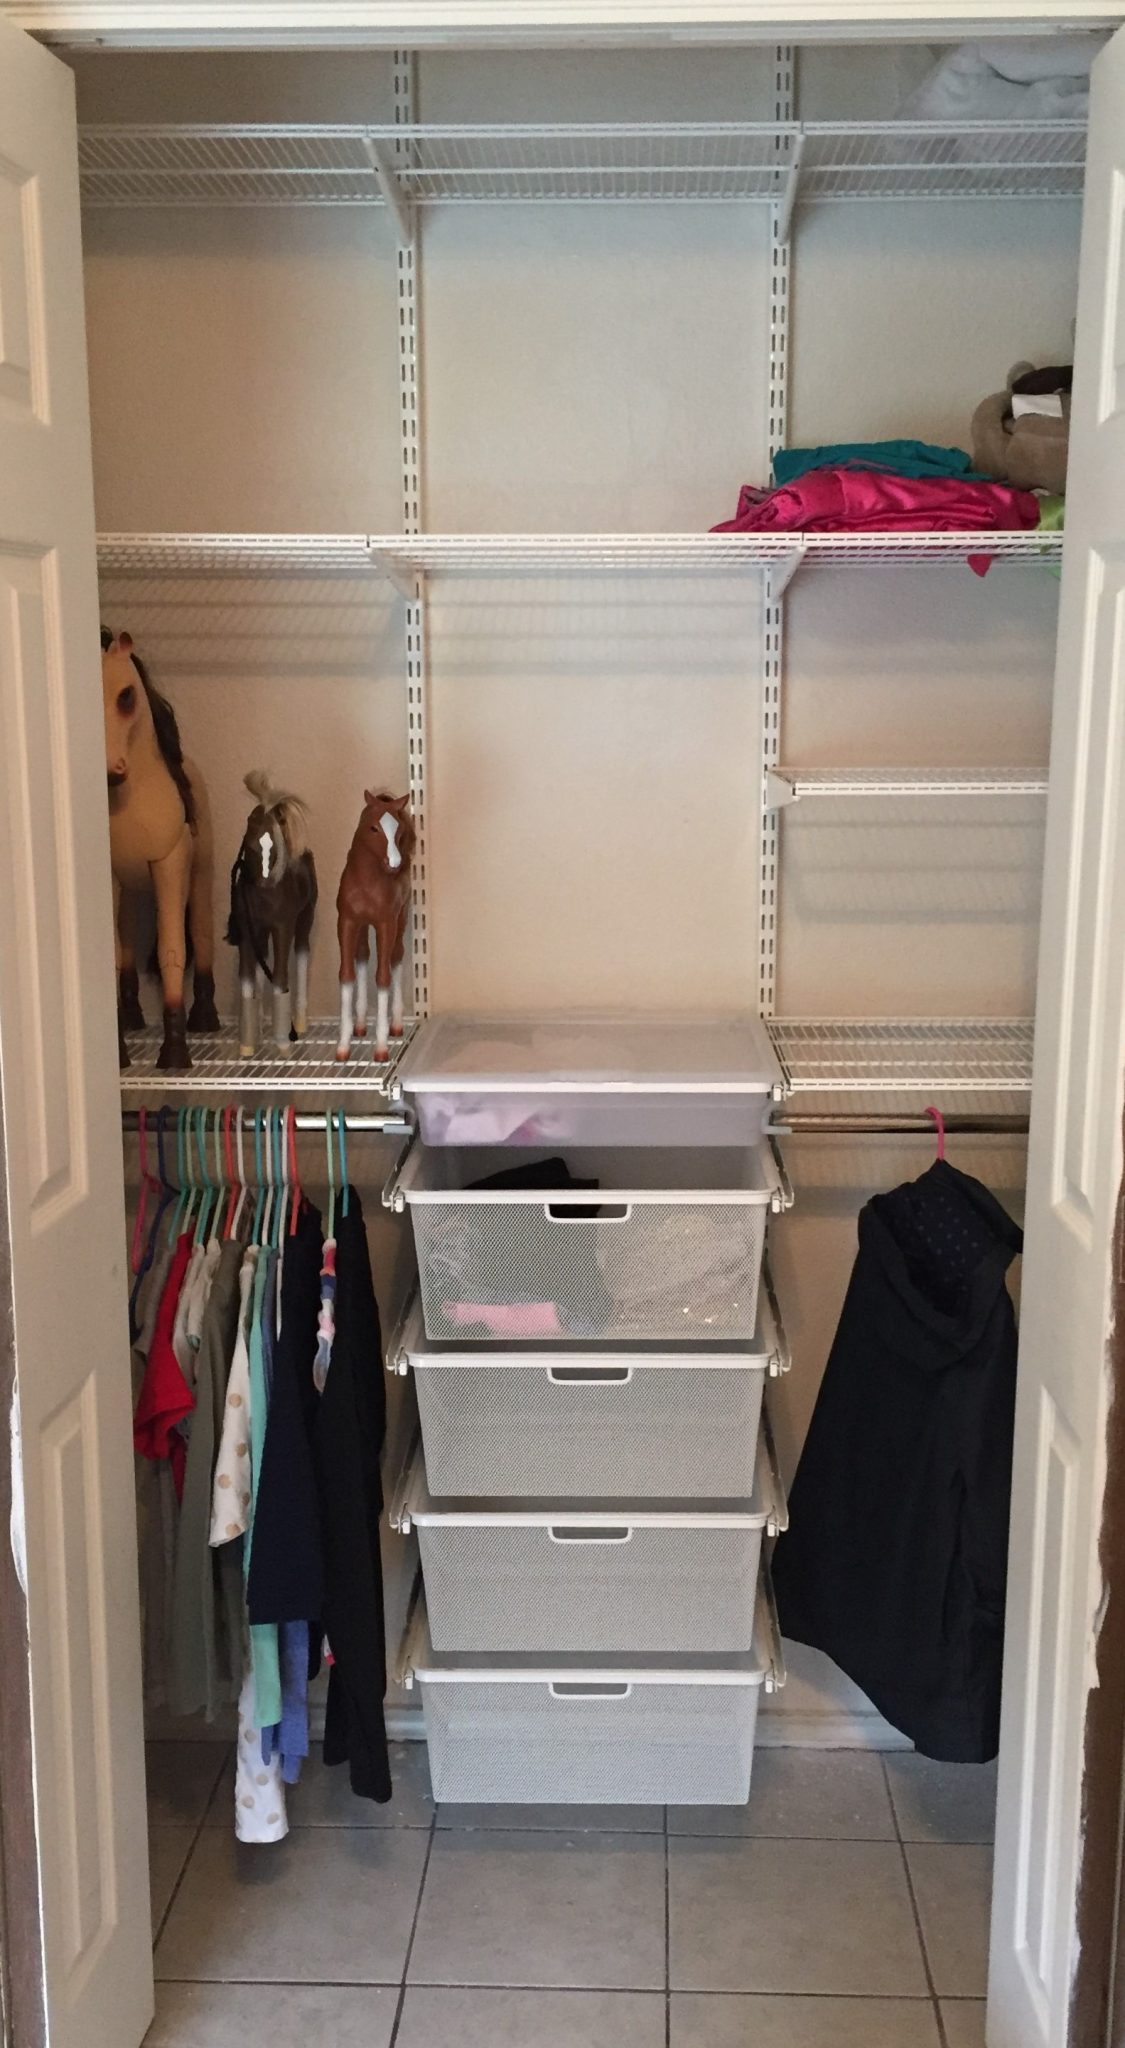 Adjustable Elfa Shelving And Drawers, How To Add More Shelves A Closet